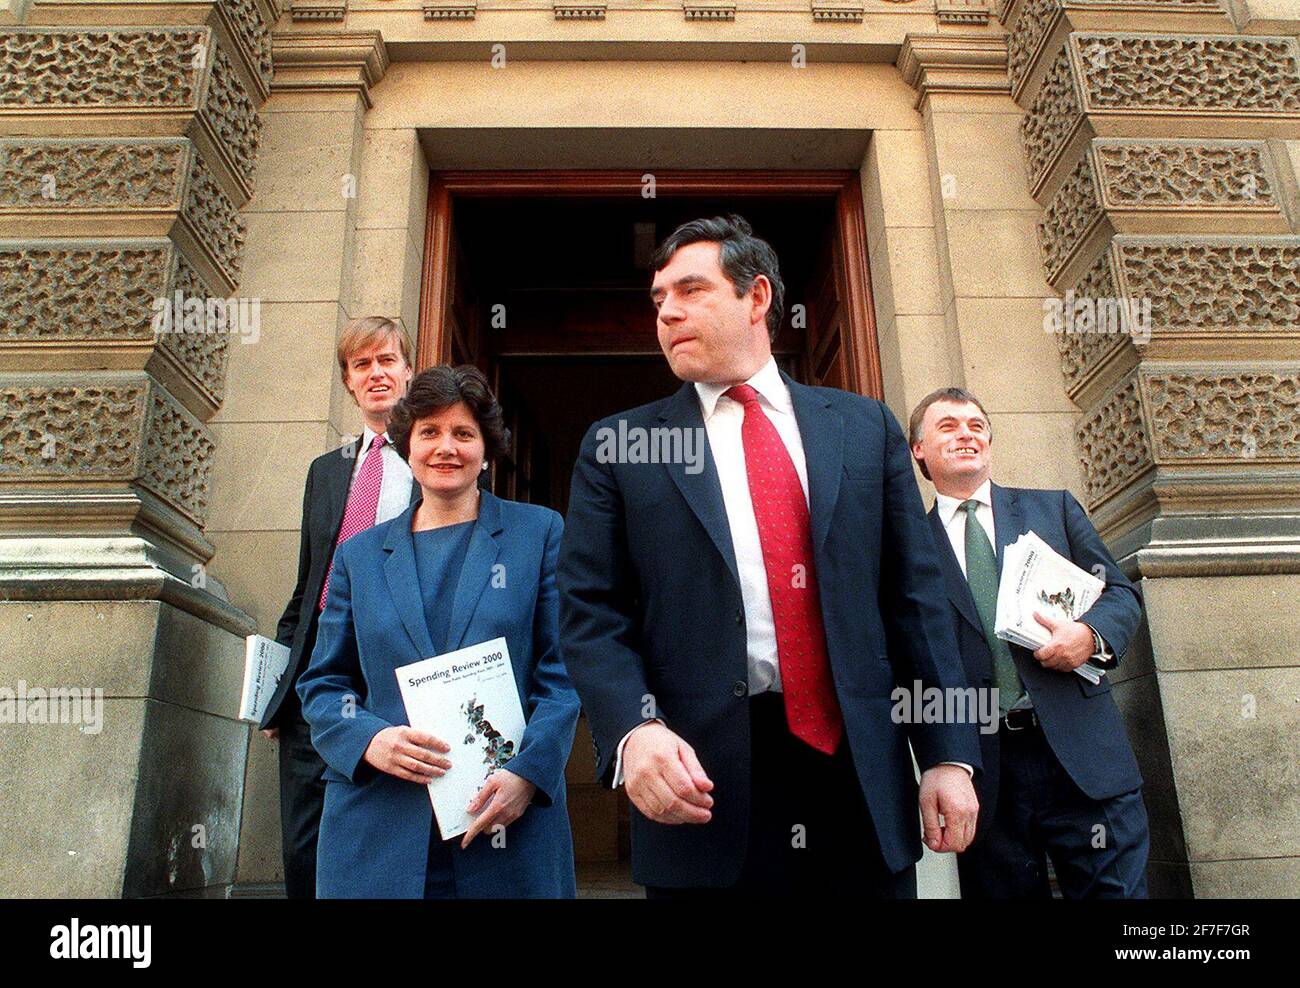 GORDON BROWN MP CHANCELLOR OF THE EXCHEQUER JULY 2000 LEAVING THE TREASURY FOR THE COMMONS THIS AFTERNOON WITH HIS TREASURY TEAM, L-R: STEPHEN TIMMS, FINANCIAL SECRETARY; MELANIE JOHNSON, ECONOMICS SECRETARY; GORDON BROWN;  DAWN PRIMOROLO, PAYMASTER GENERAL: ANDREW SMITH, CHIEF SECRETARY TO THE TREASURY Stock Photo